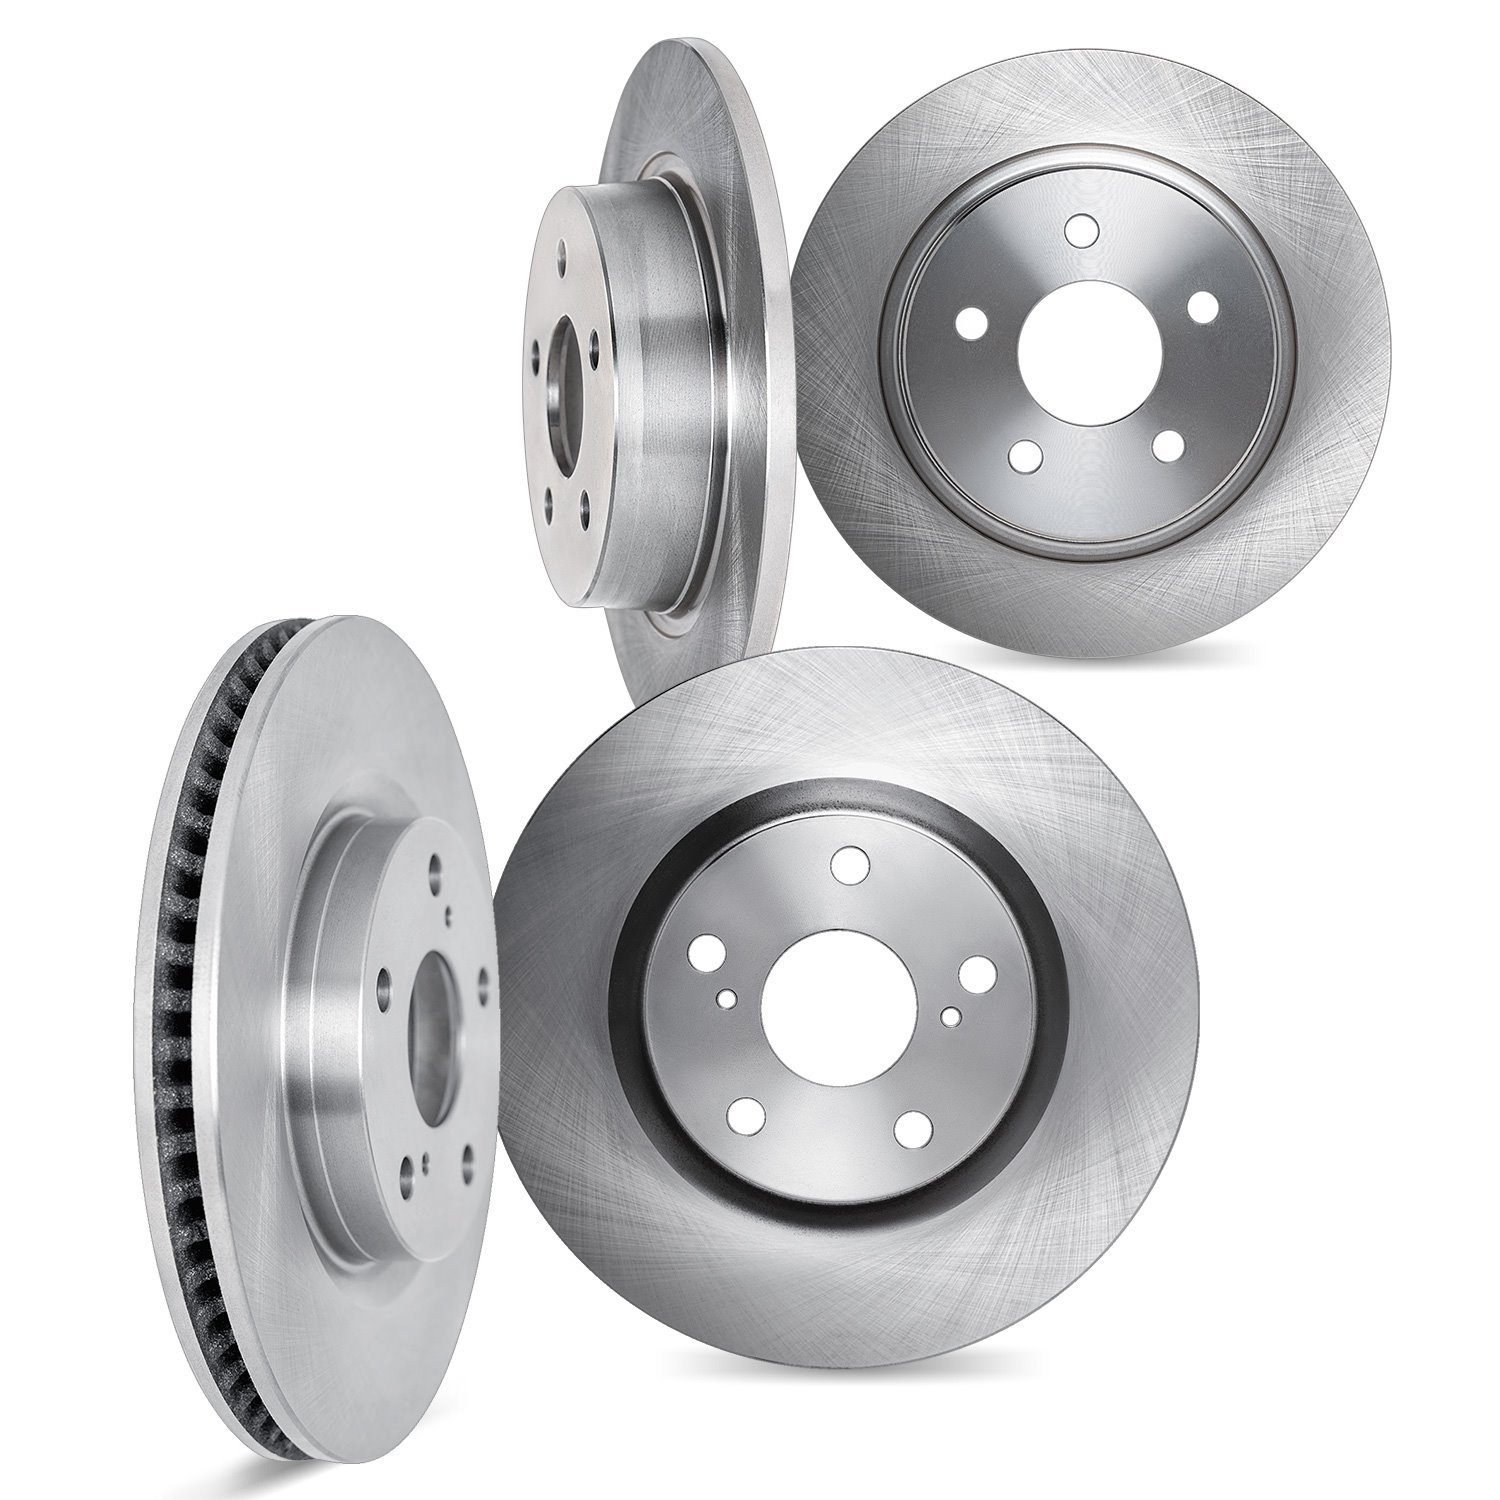 6004-39055 Brake Rotors, Fits Select Mopar, Position: Front and Rear